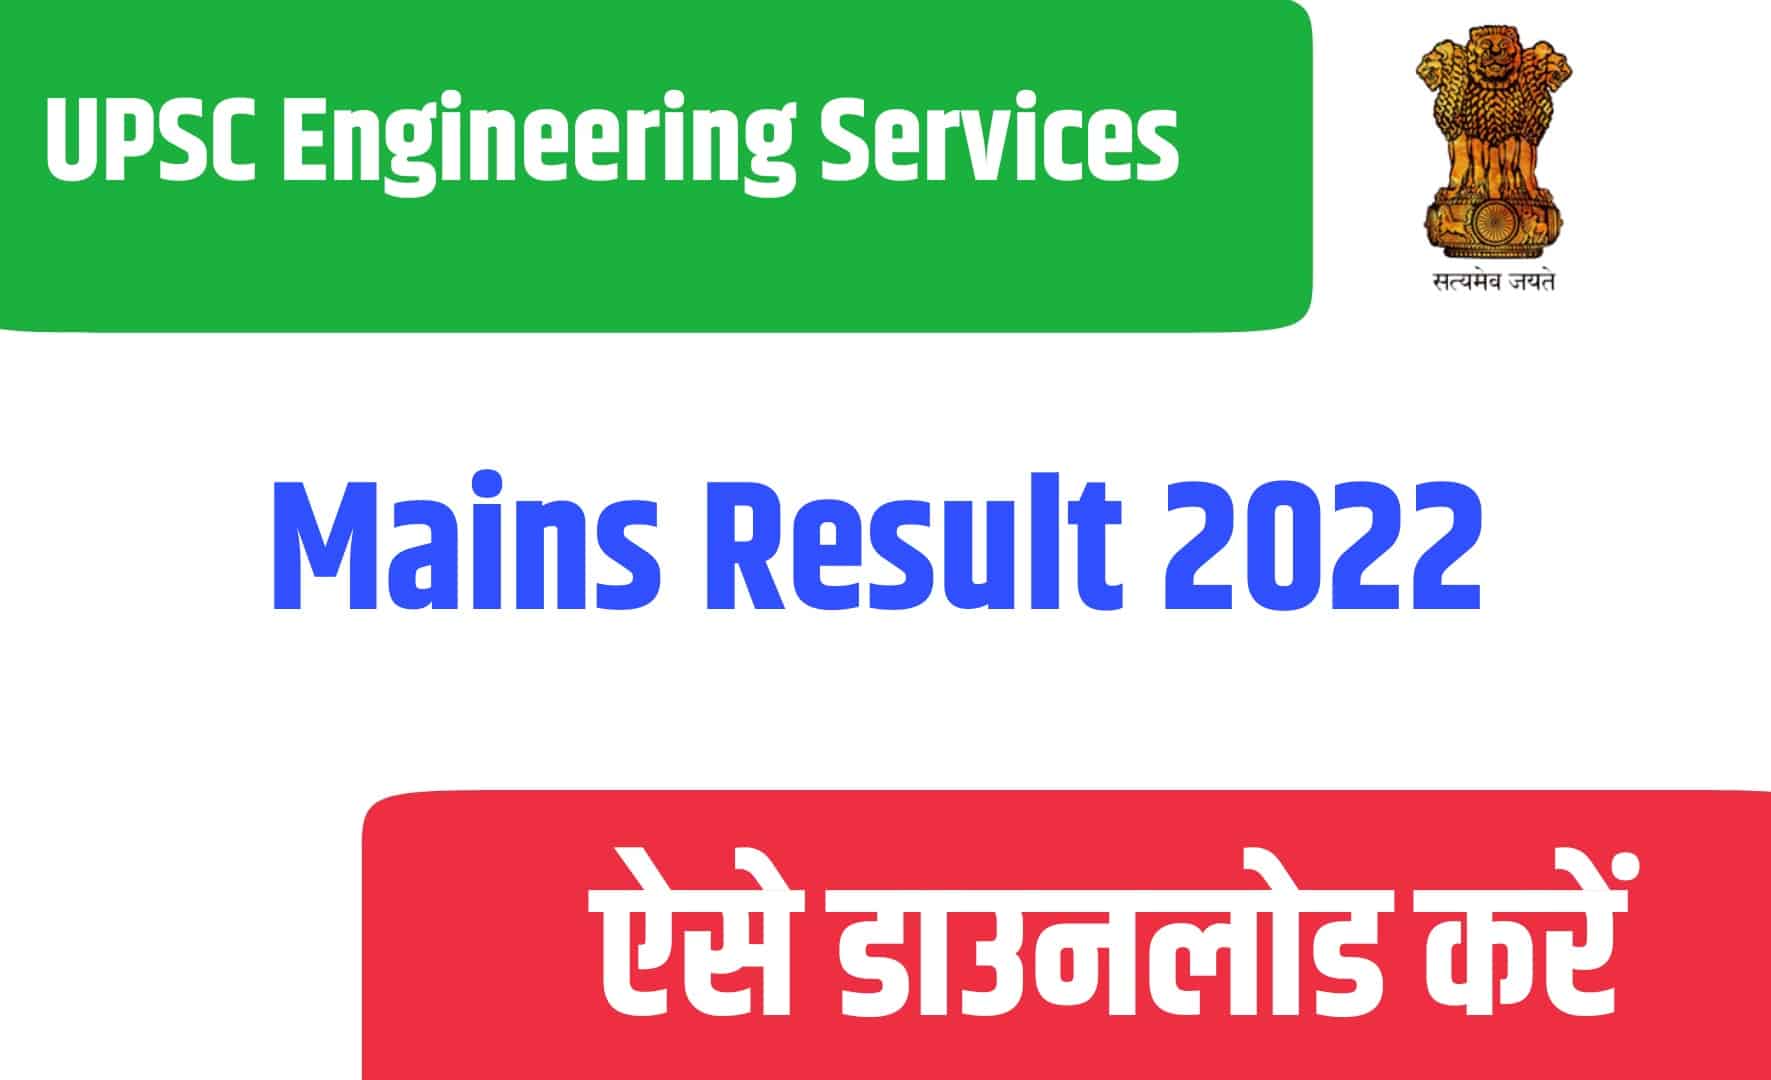 UPSC Engineering Services Mains Result 2022